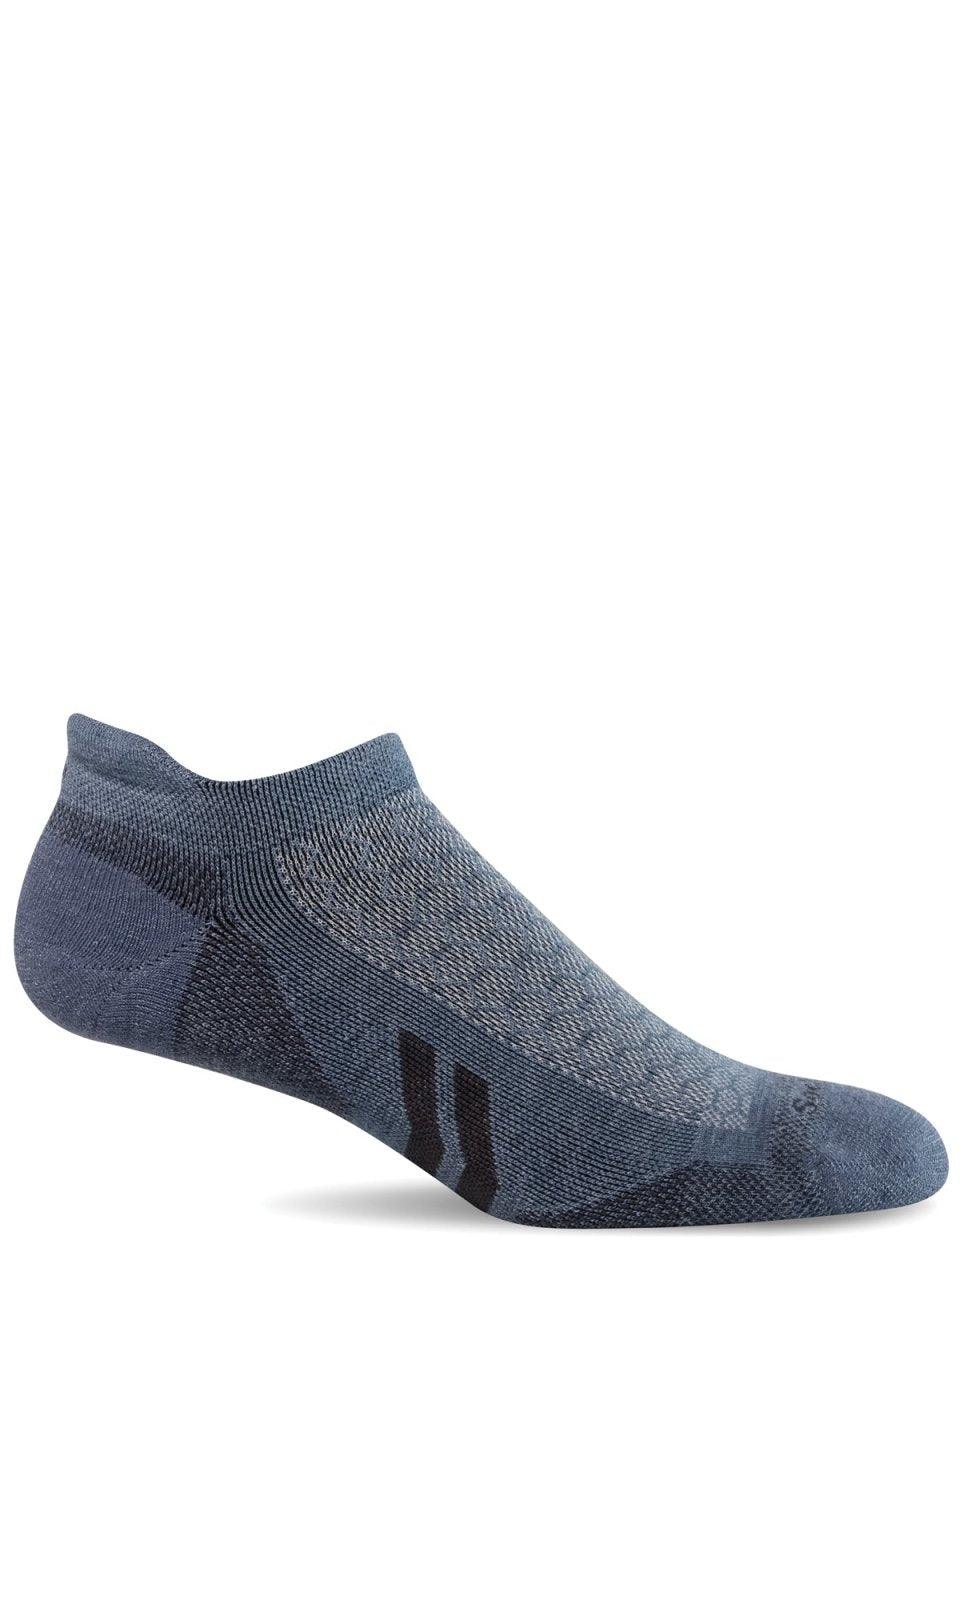 Incline II Micro | Moderate Compression Socks - Sockwell - The Sock Monster